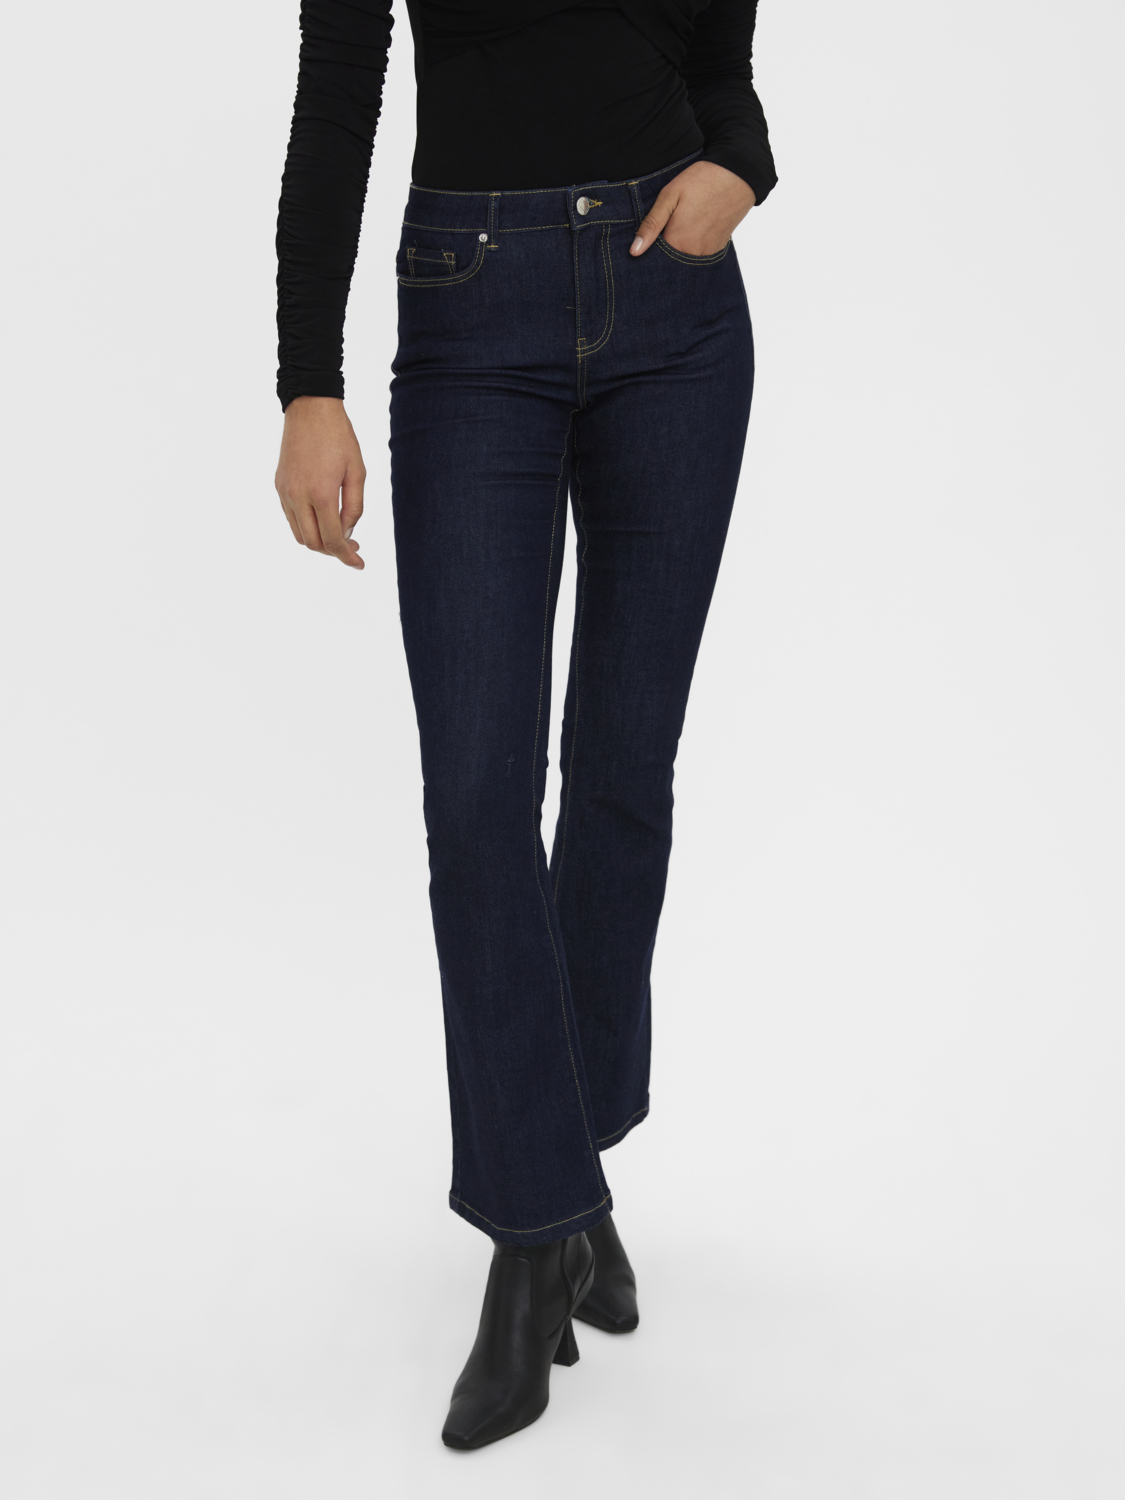 FINAL SALE- Peachy flared fit jeans